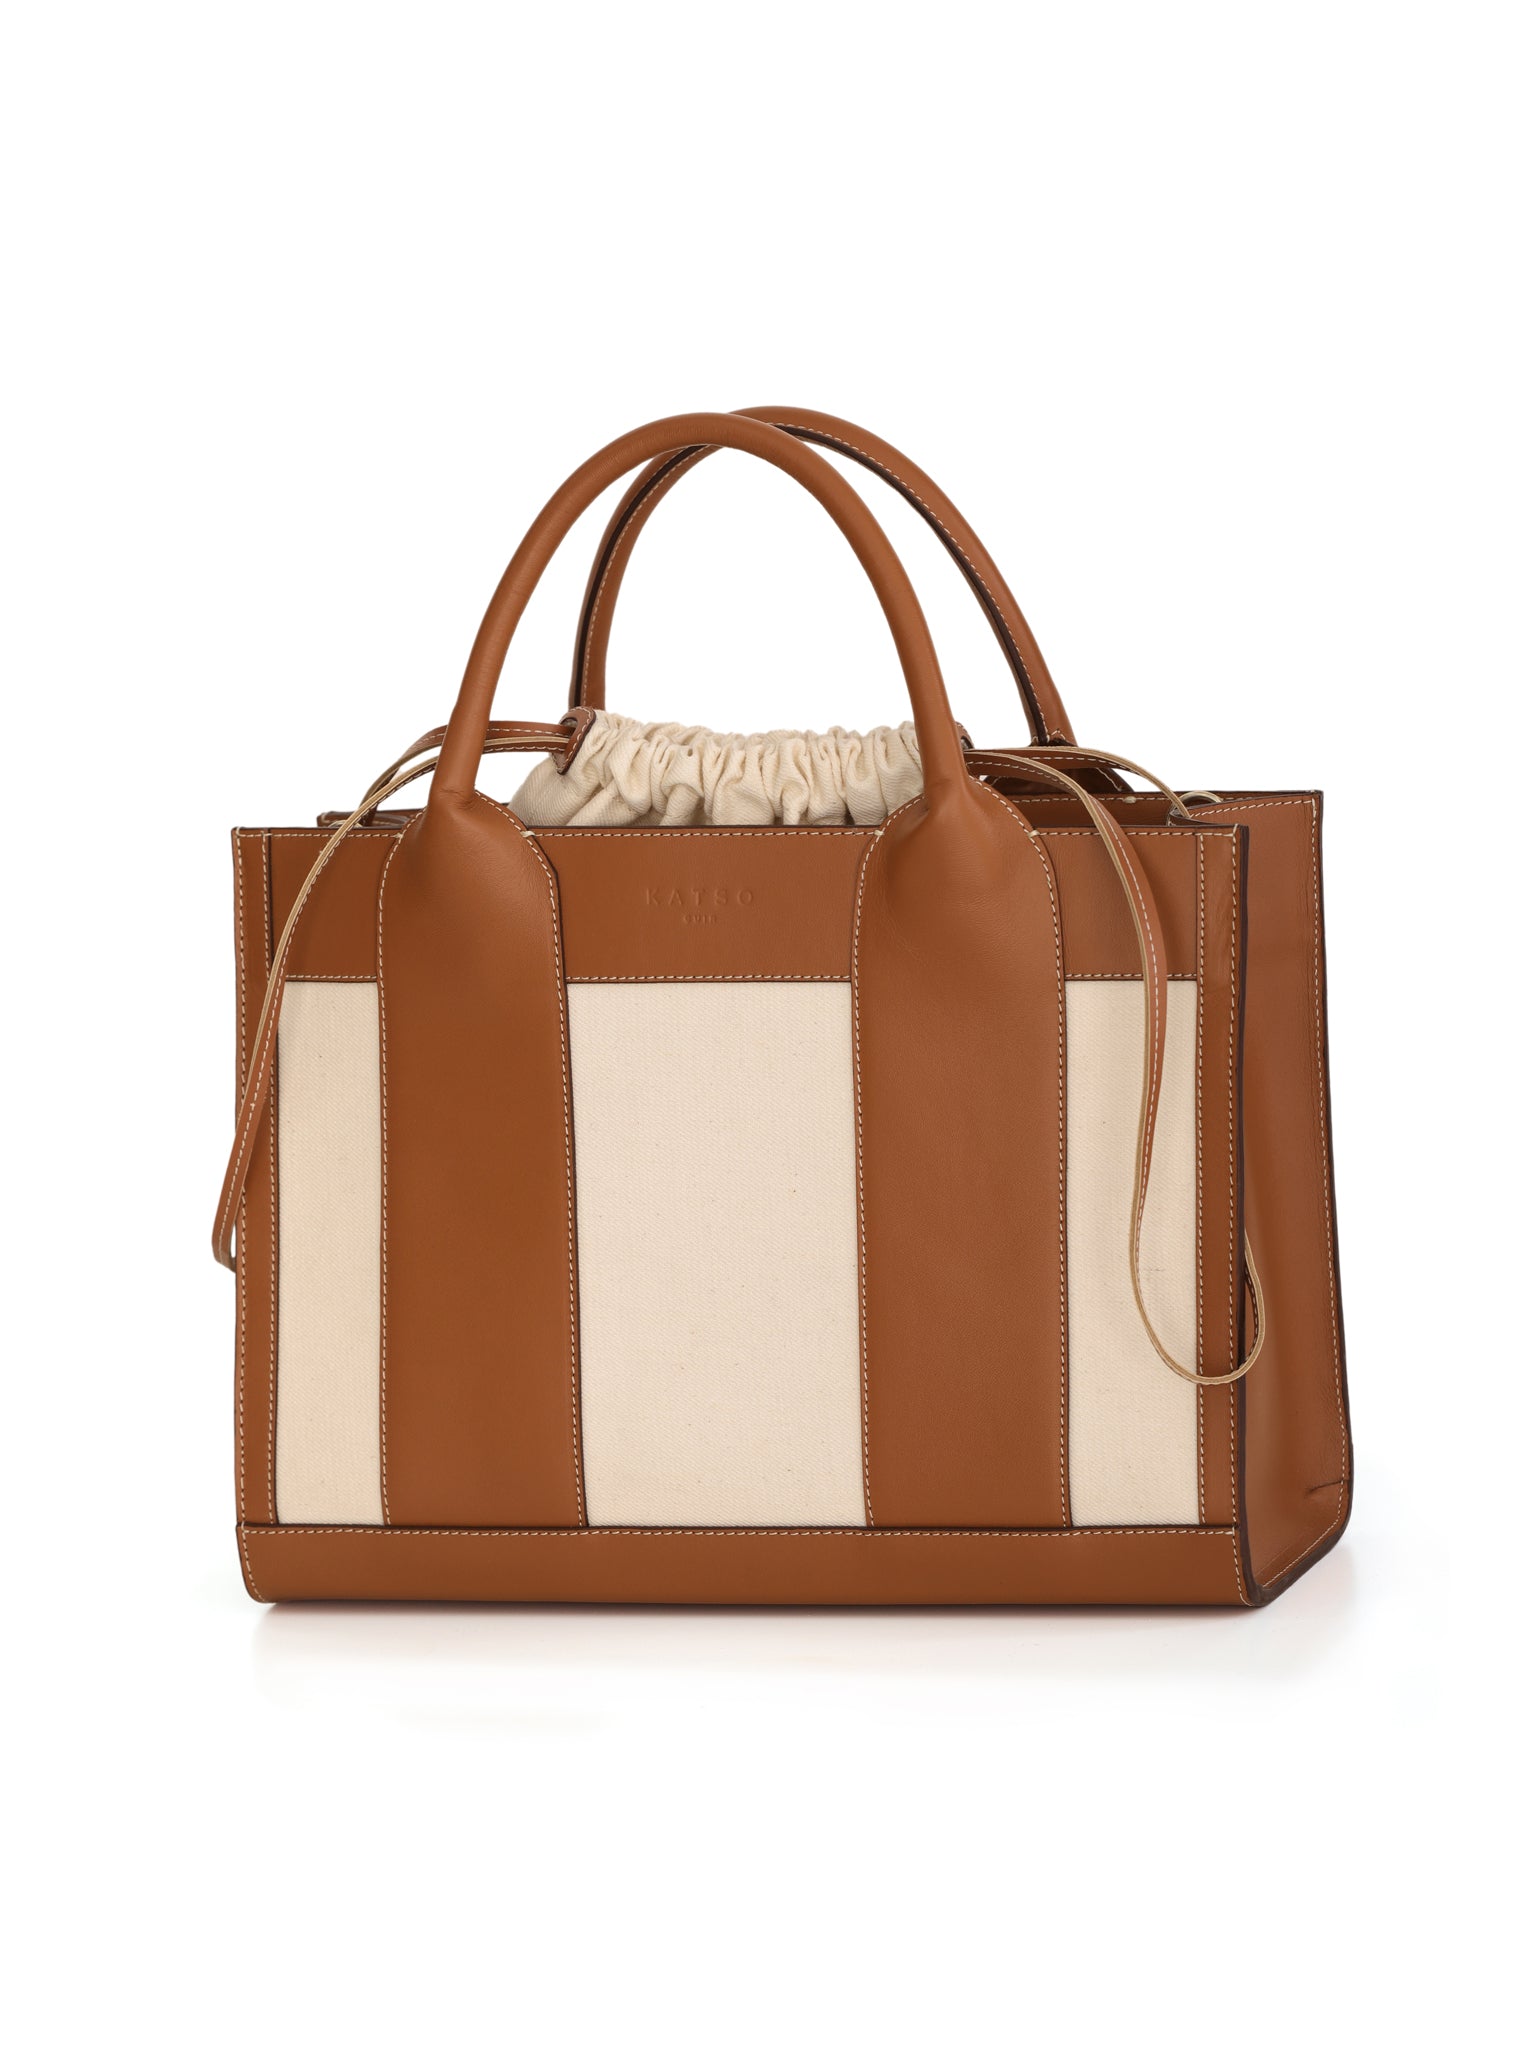 The leather tote bag